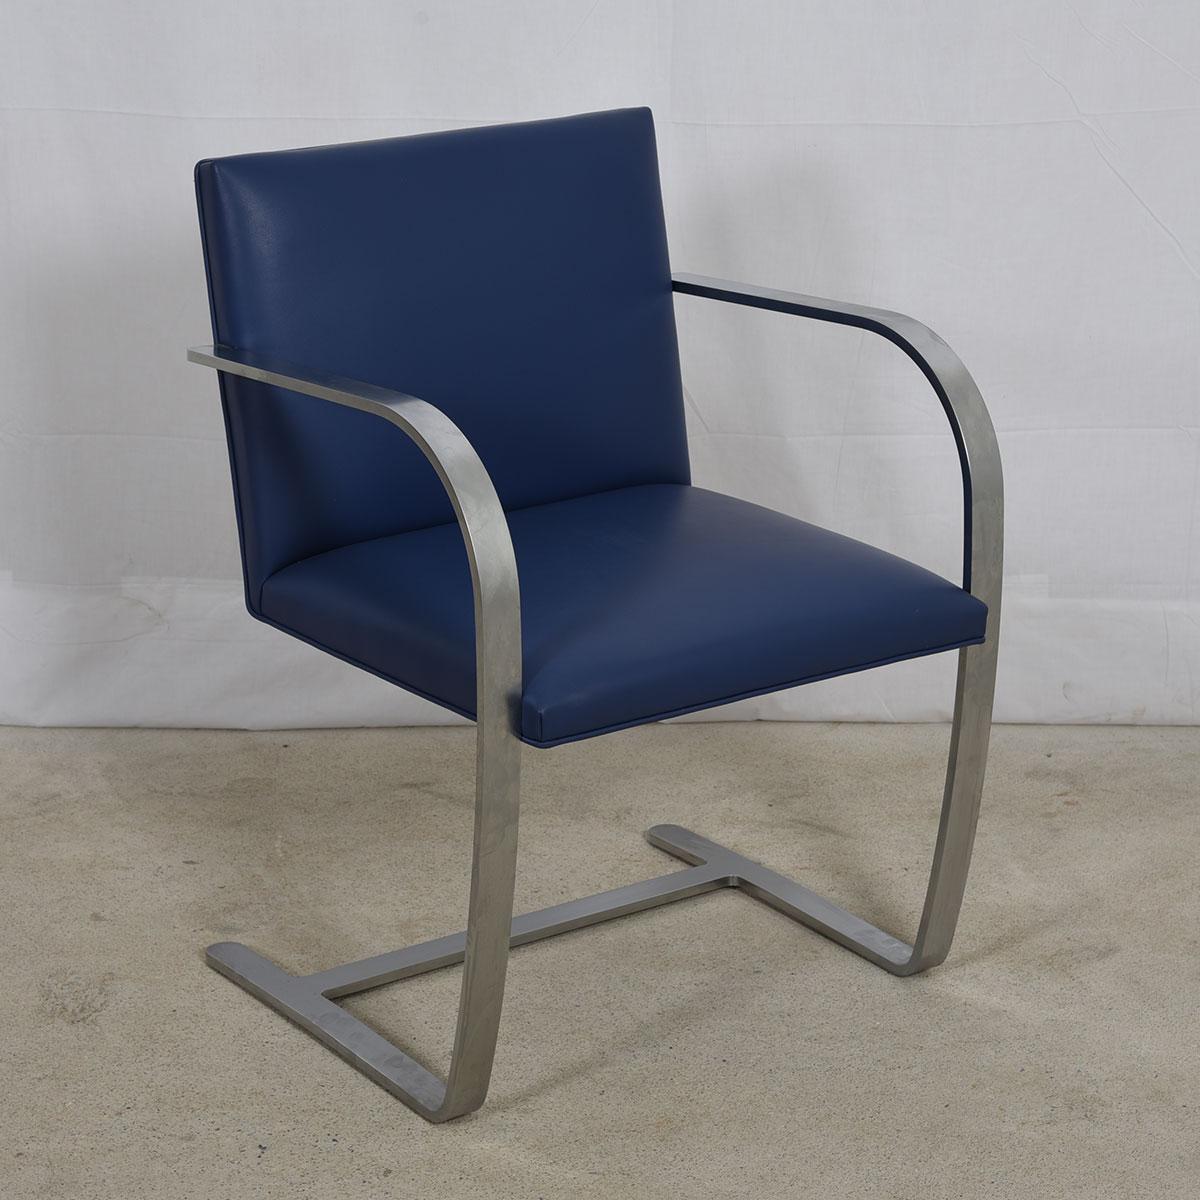 Mid-Century Modern Pair of Stainless Steel Flat Bar Brno Chairs with Cadet Blue Leather Upholstery For Sale